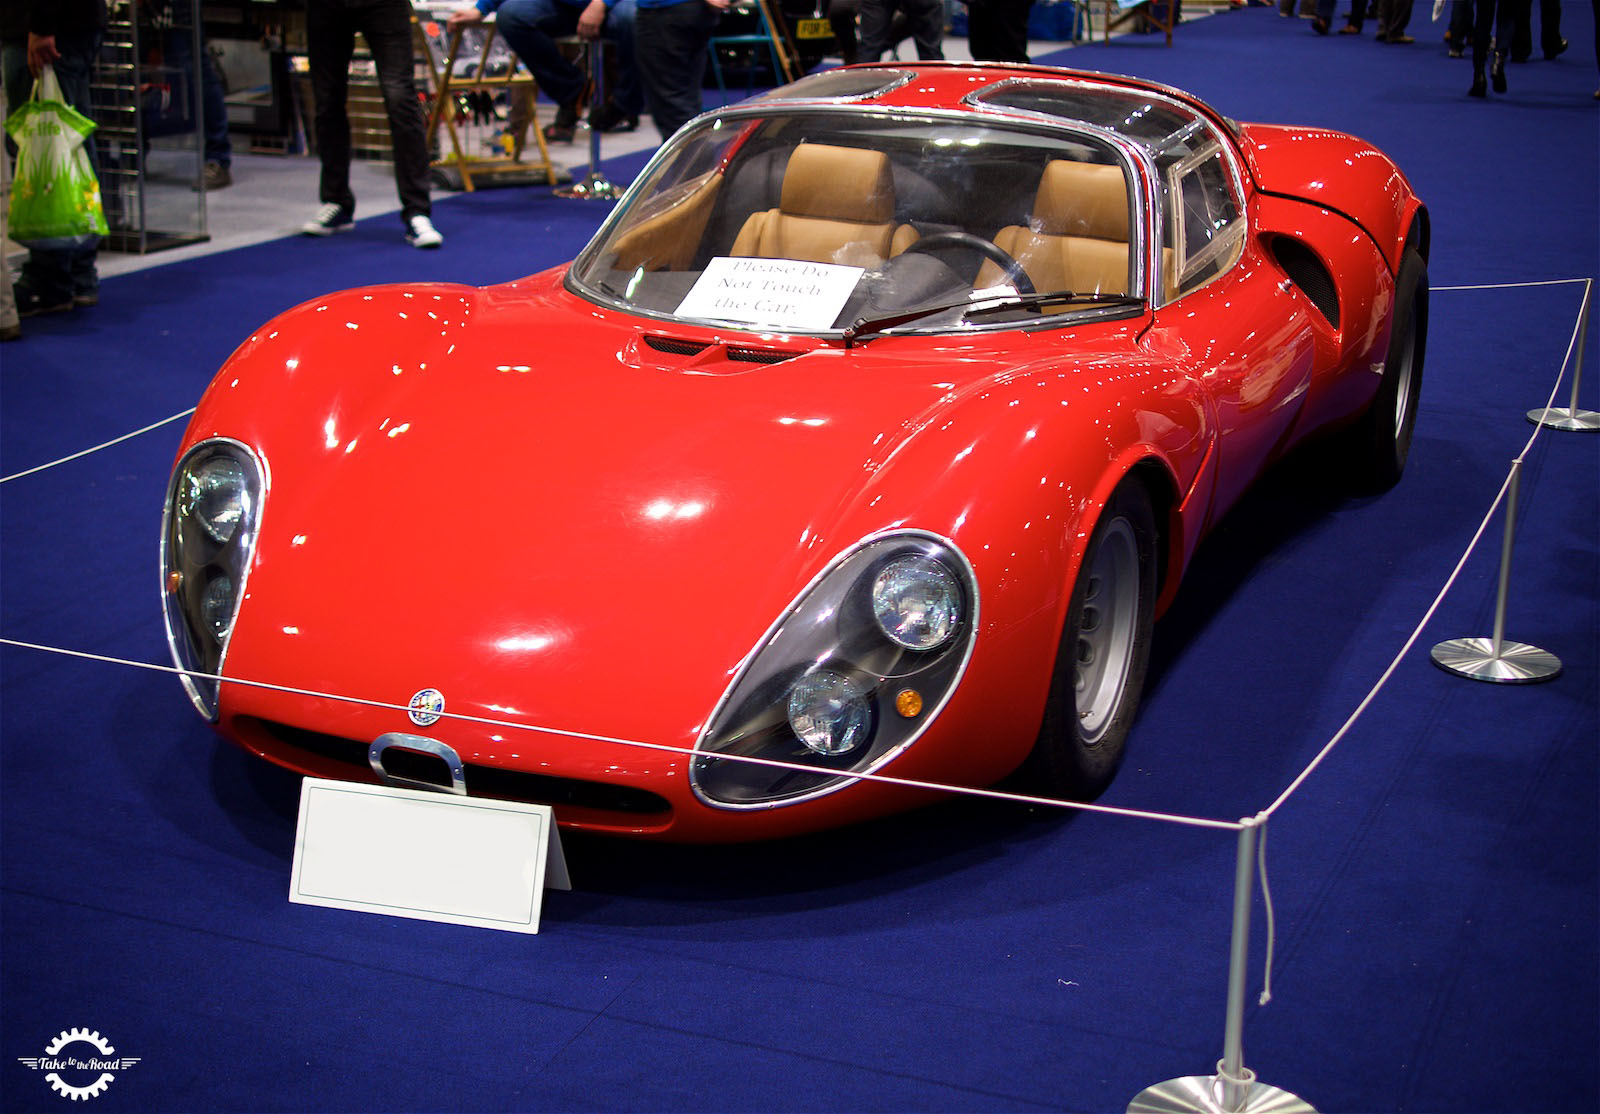 The Alfa Romeo Tipo 33 Stradale - More than just art on wheels